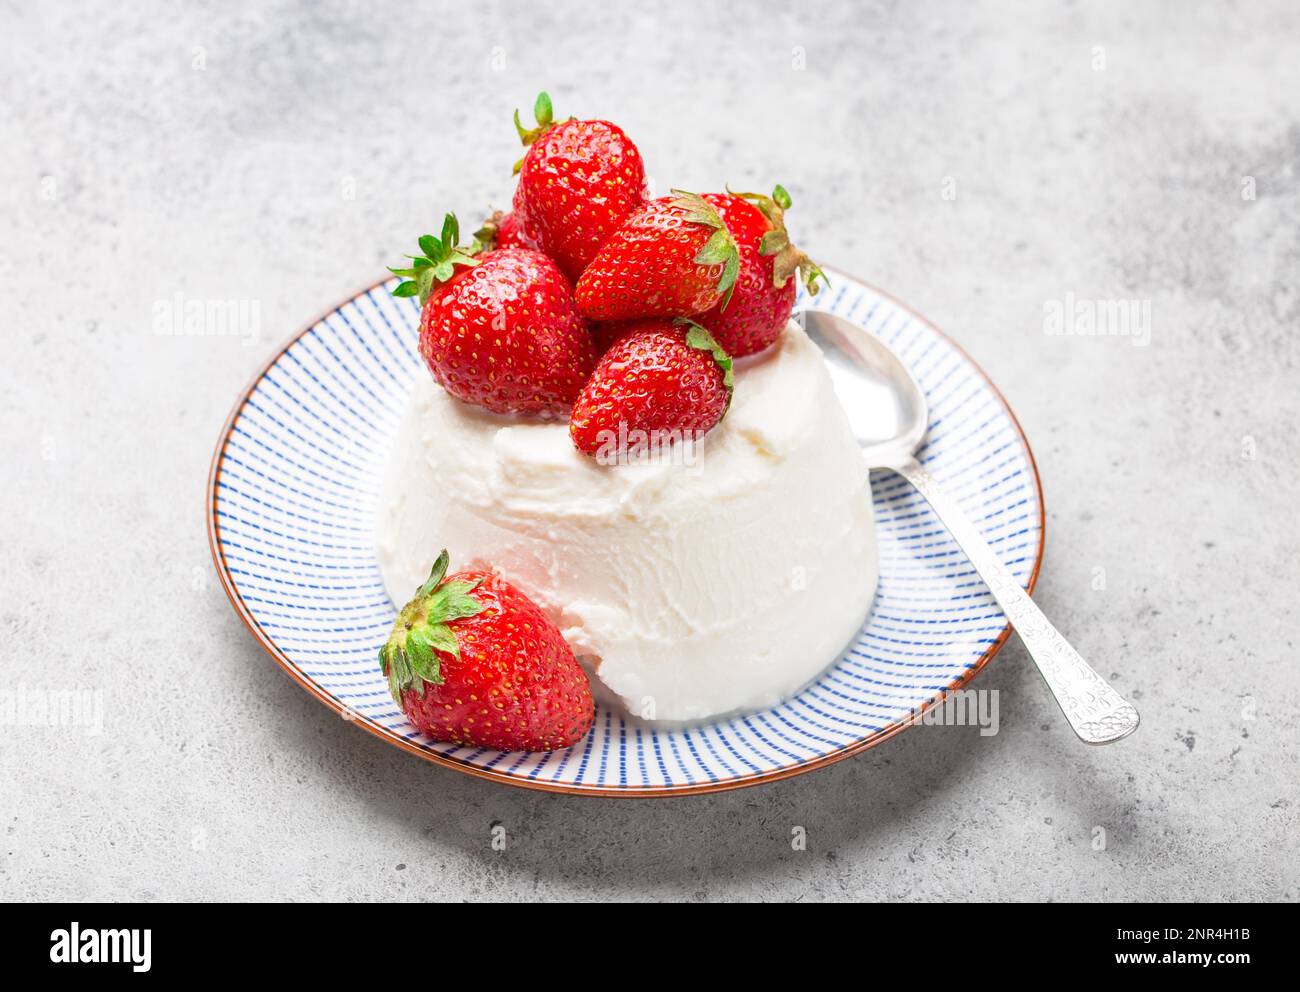 Fresh Italian cheese ricotta with strawberries on a plate with a spoon, grey rustic stone background, light summer dessert or snack, good for diet or Stock Photo